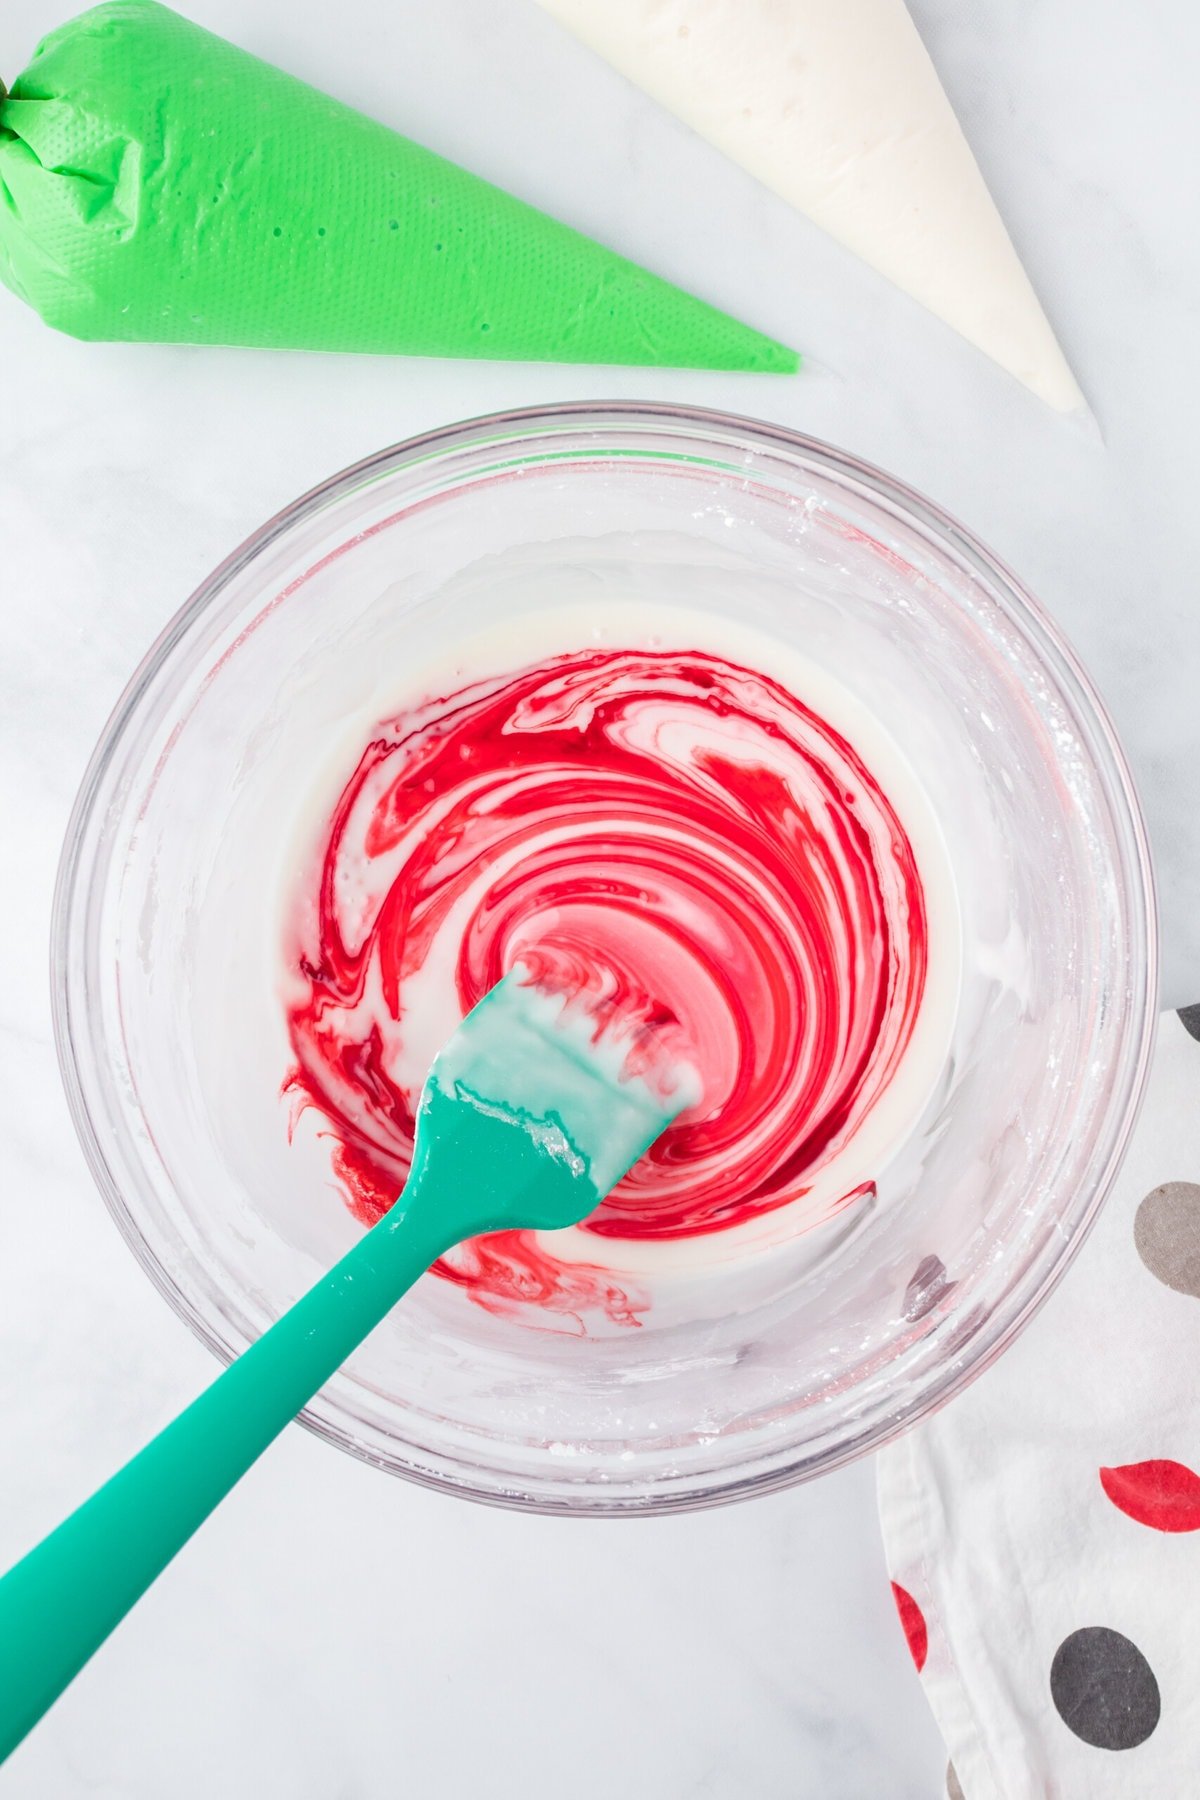 Adding red food coloring into the icing.